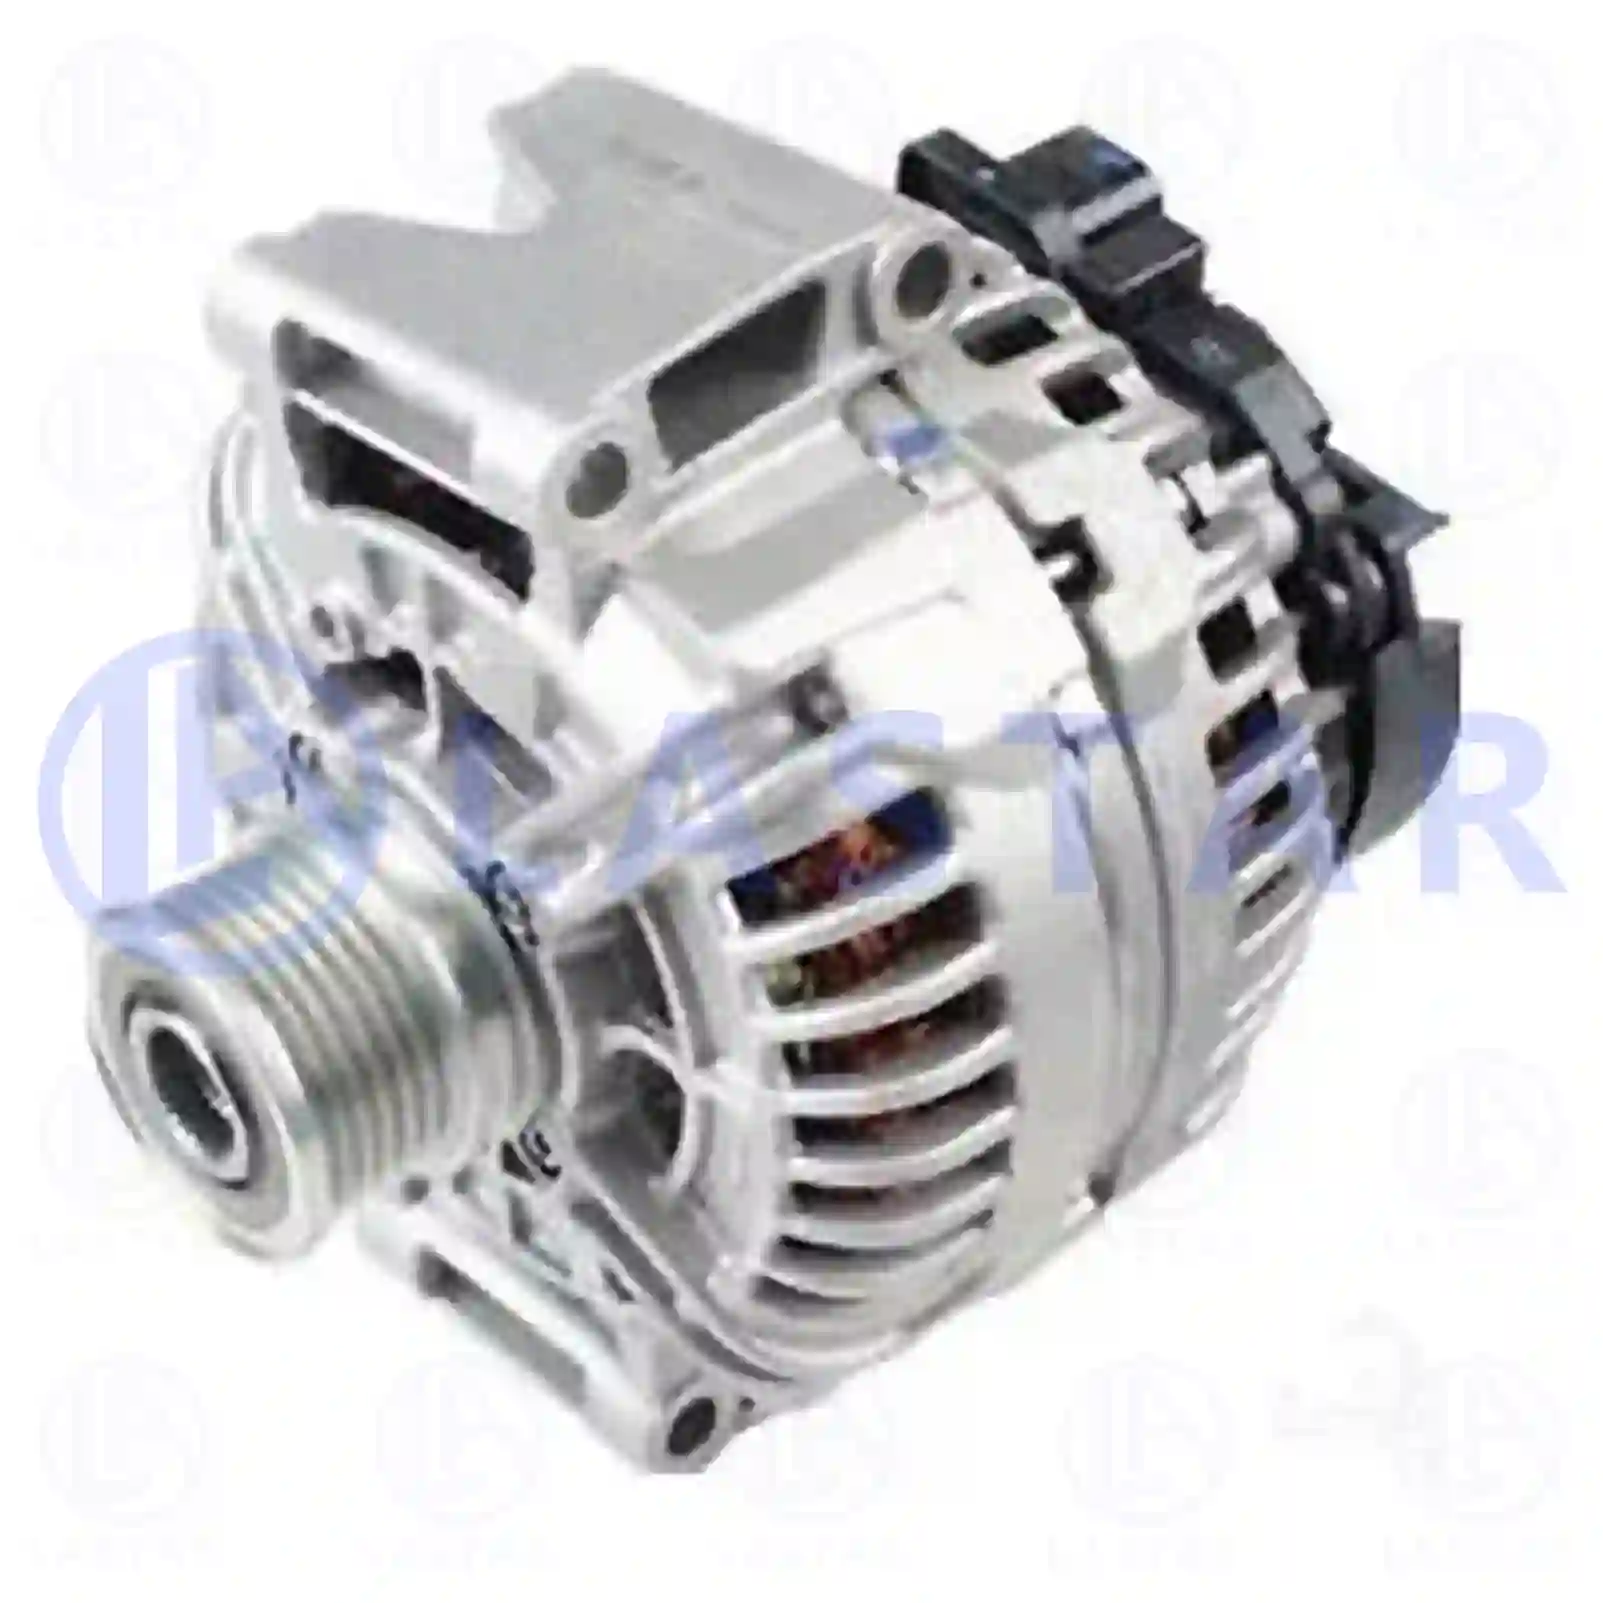 Alternator, without pulley, 77710135, 121547902, 013154 ||  77710135 Lastar Spare Part | Truck Spare Parts, Auotomotive Spare Parts Alternator, without pulley, 77710135, 121547902, 013154 ||  77710135 Lastar Spare Part | Truck Spare Parts, Auotomotive Spare Parts